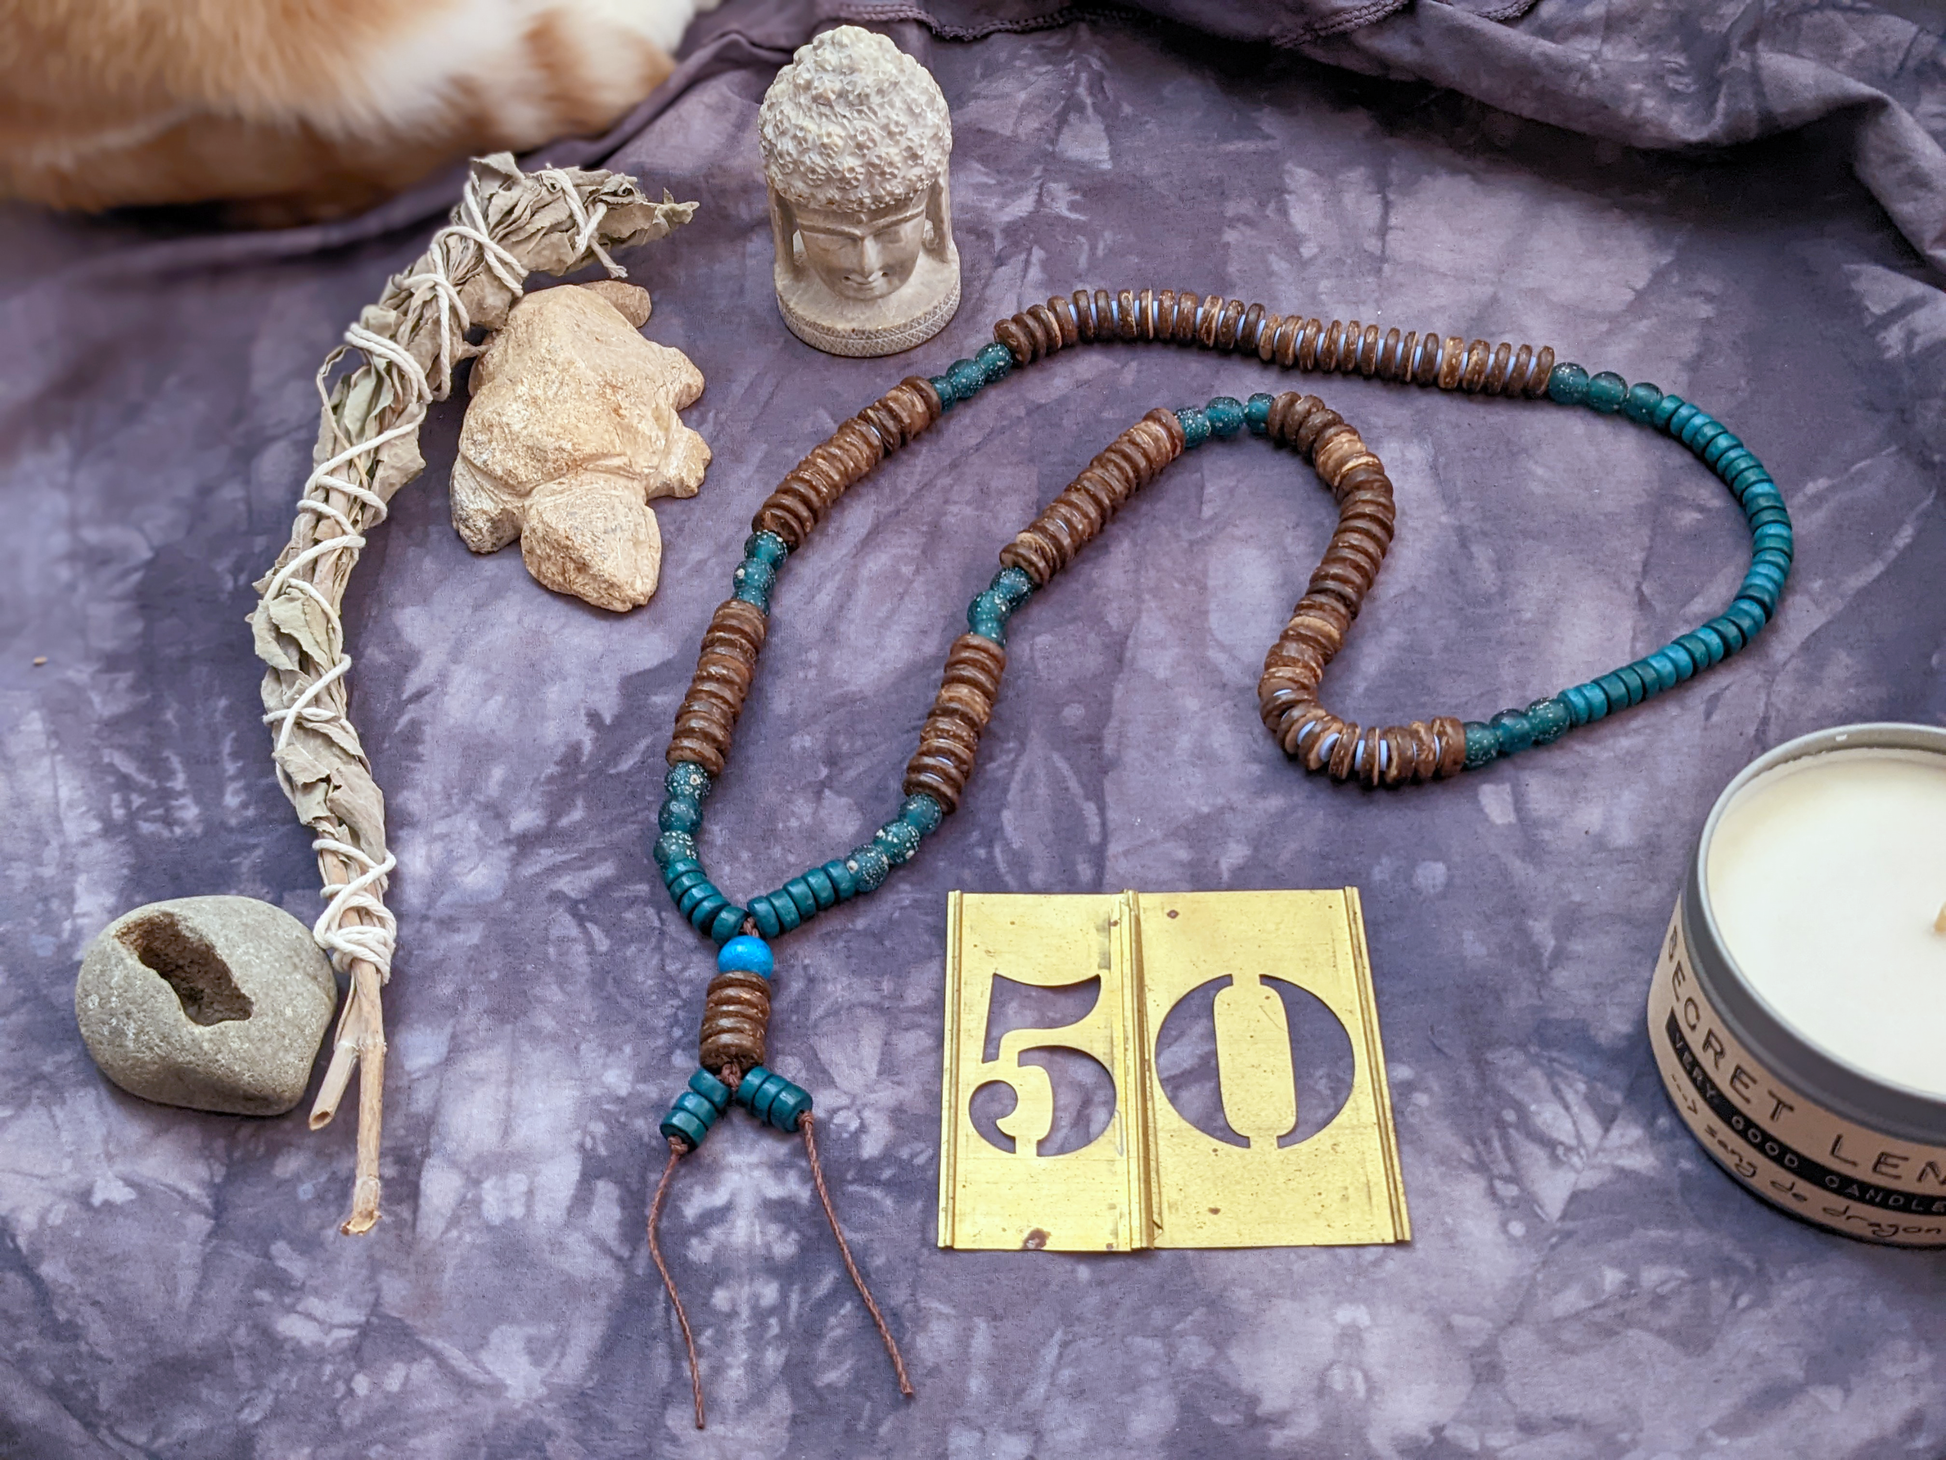 secret lentil soothsayer beads necklace in cocoa brown, teal, and lavender